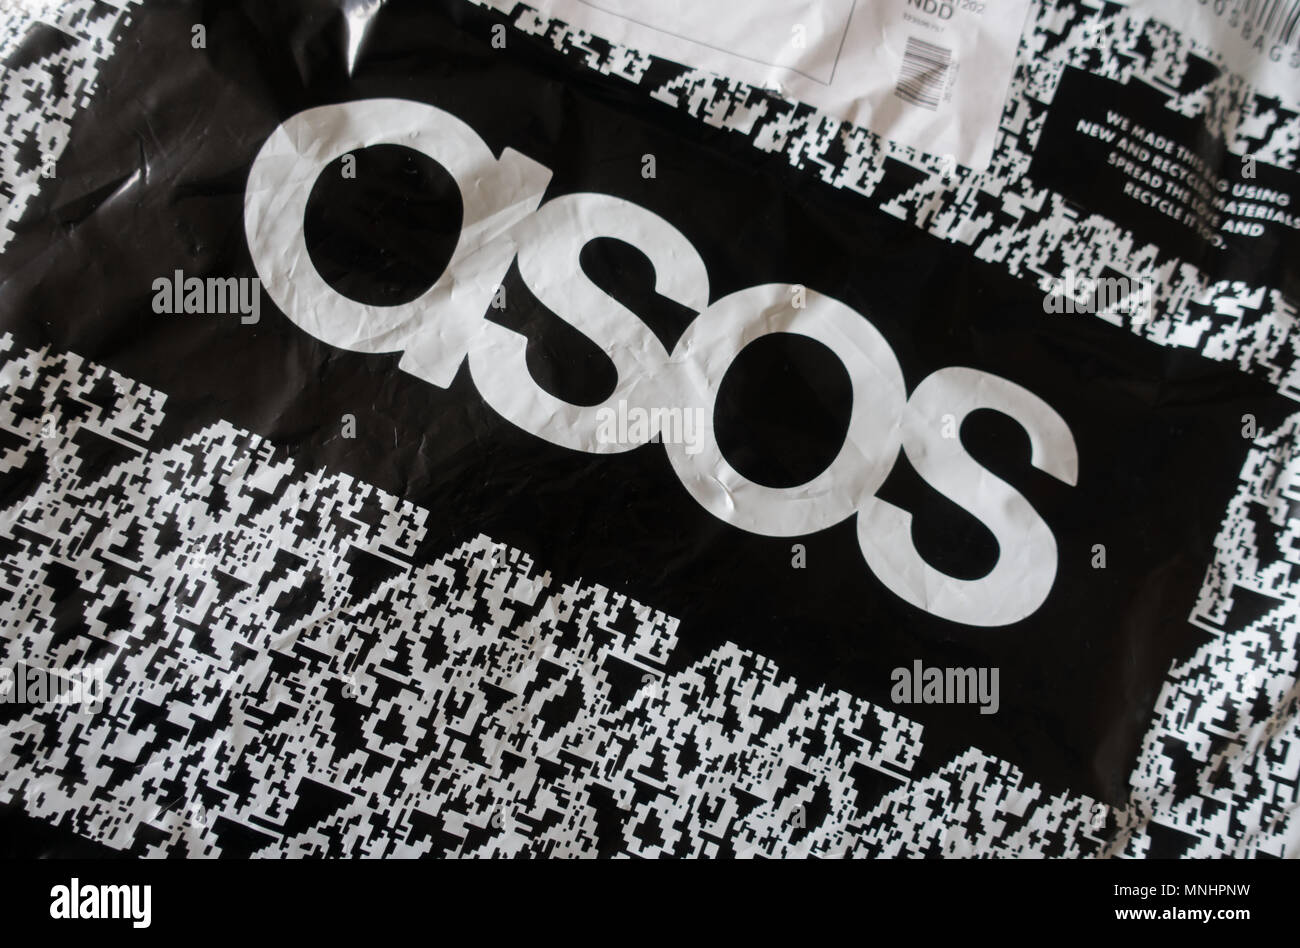 Asos plastic packaging from the online shopping giant Stock Photo - Alamy